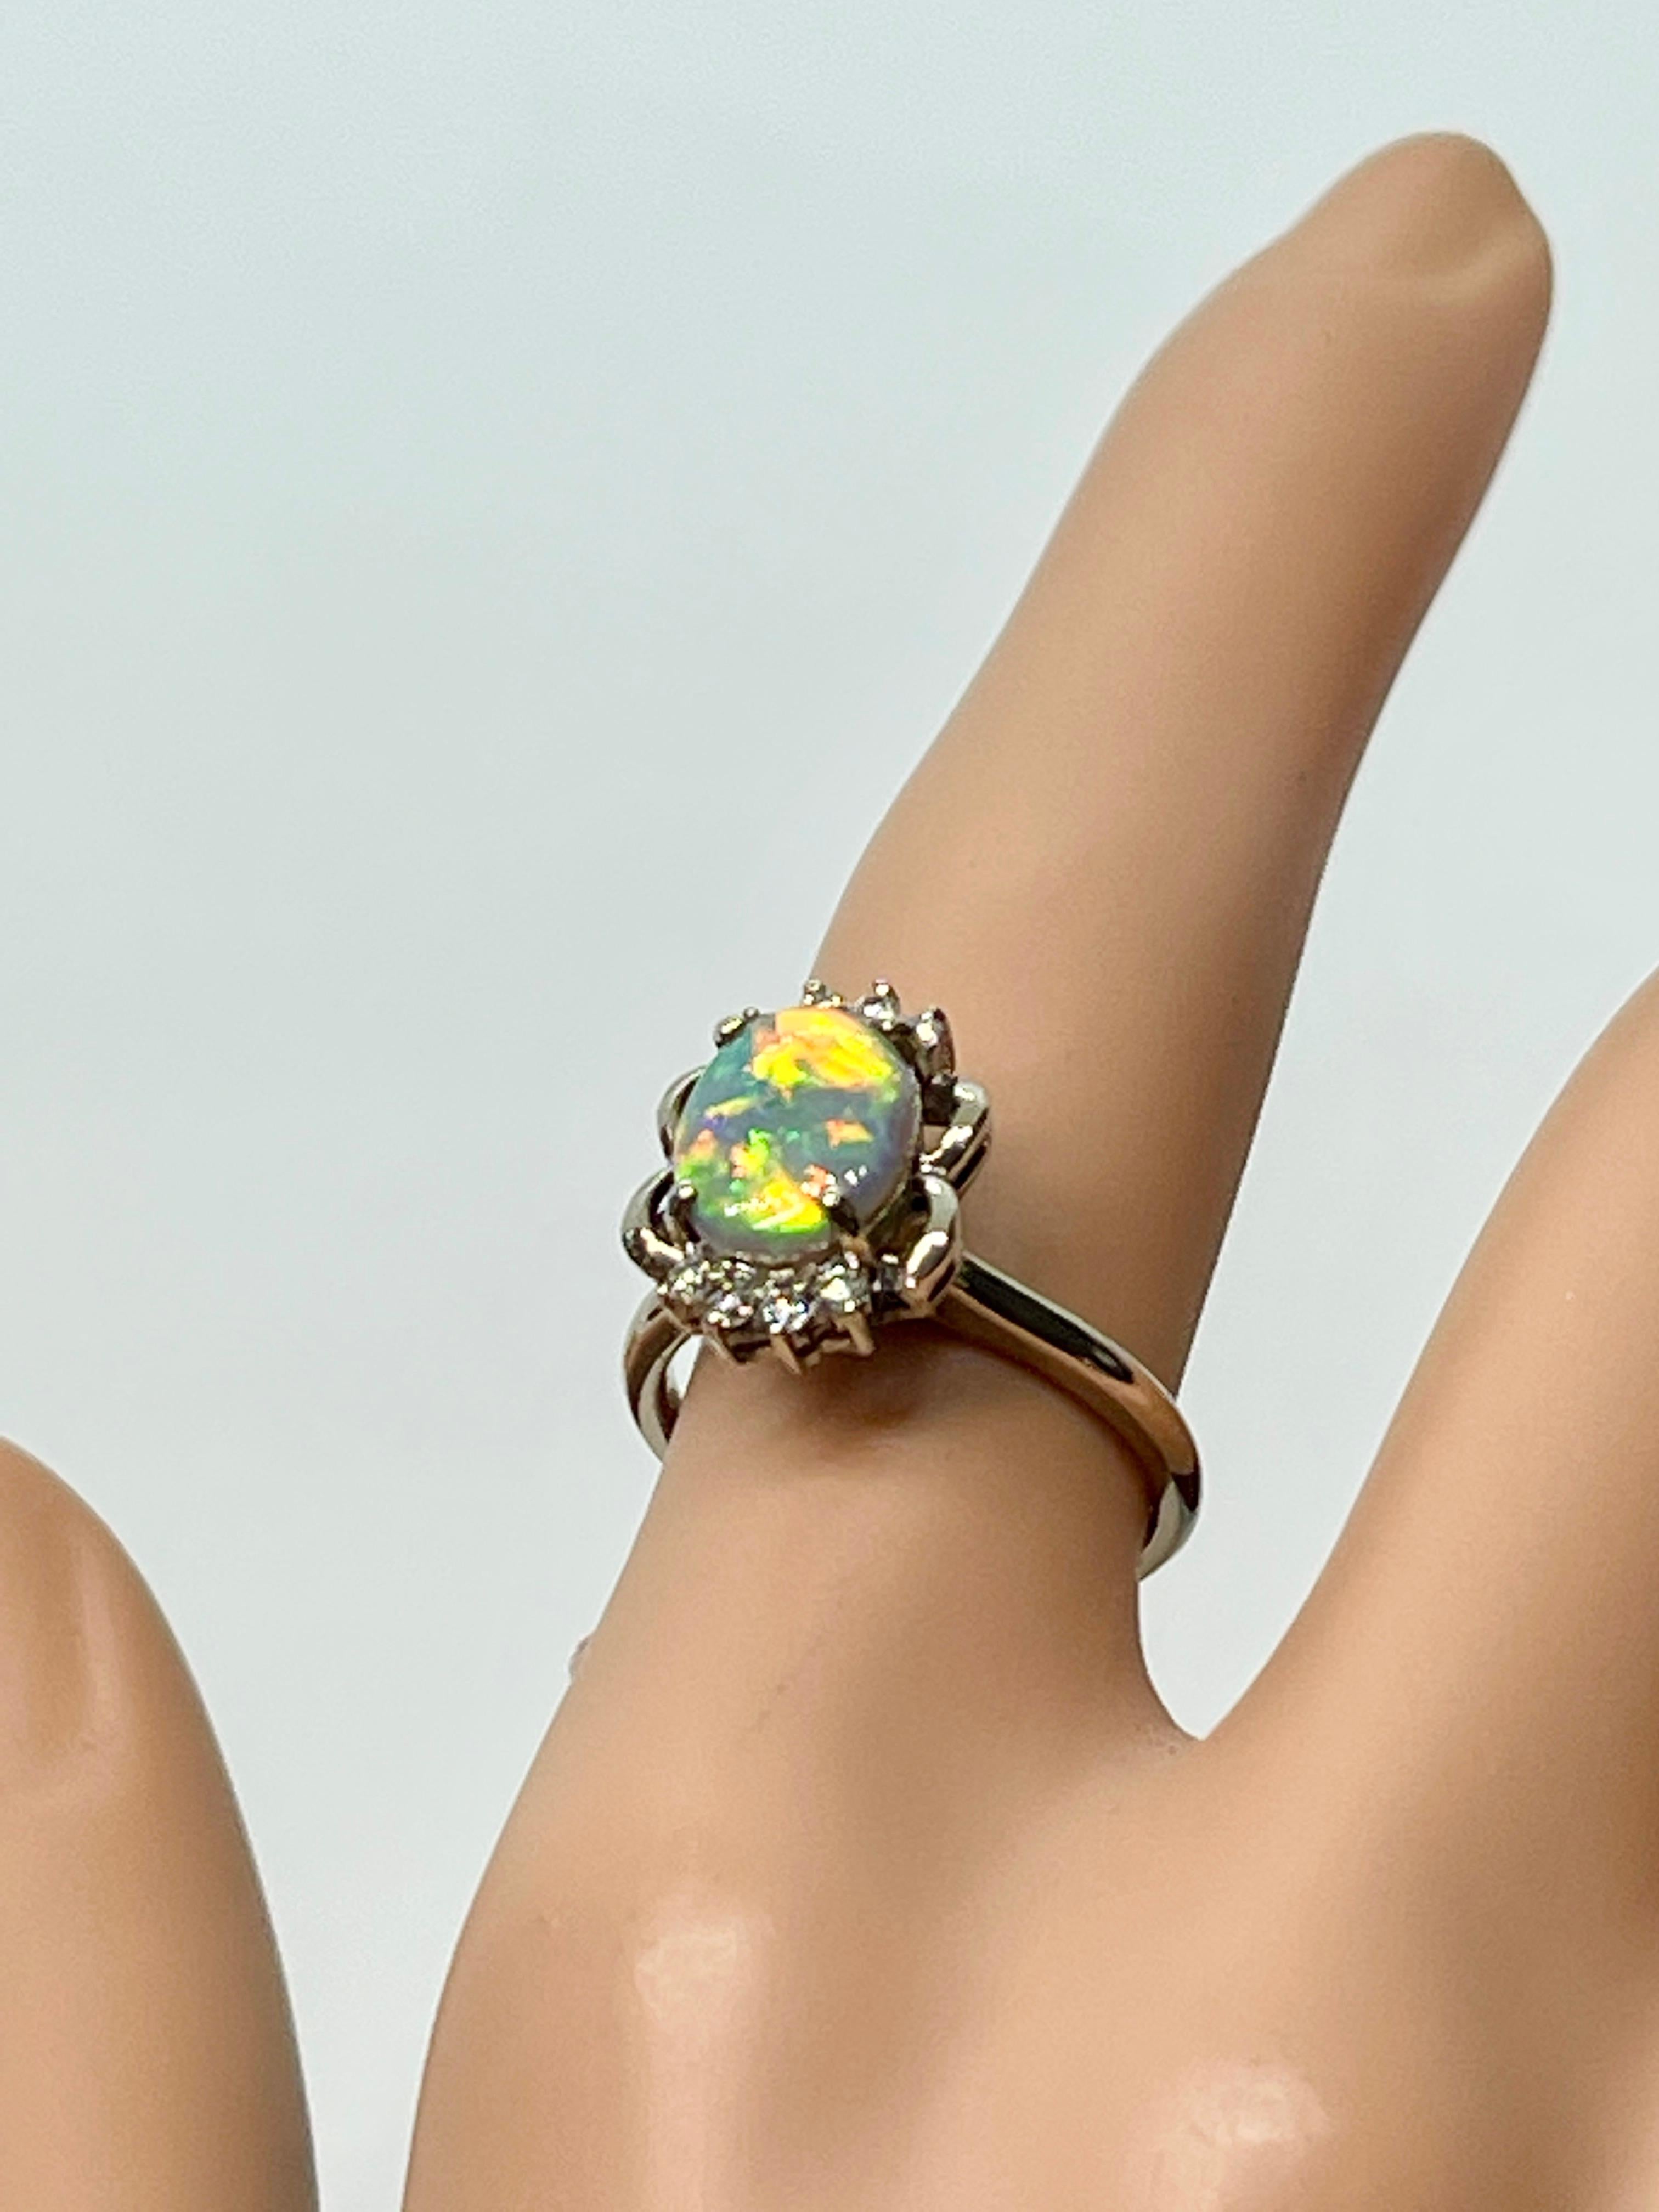 Modern Rare Harlequin Pattern Solid Semi Black Opal Diamond Ring 9ct Gold Valuation For Sale